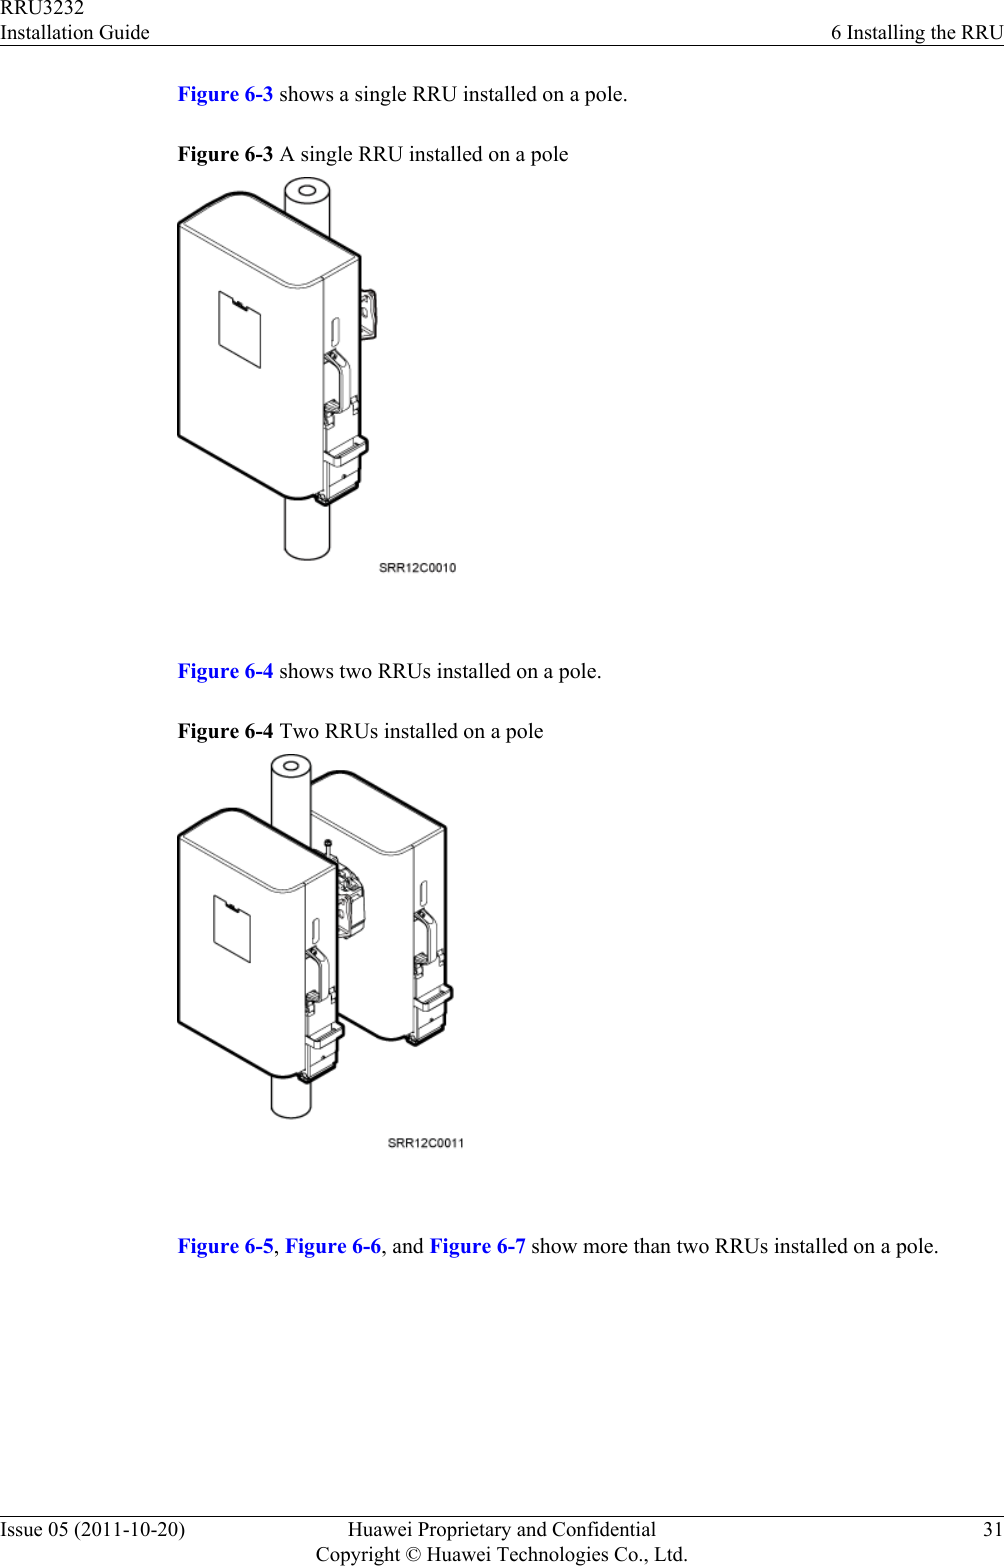 Figure 6-3 shows a single RRU installed on a pole.Figure 6-3 A single RRU installed on a pole Figure 6-4 shows two RRUs installed on a pole.Figure 6-4 Two RRUs installed on a pole Figure 6-5, Figure 6-6, and Figure 6-7 show more than two RRUs installed on a pole.RRU3232Installation Guide 6 Installing the RRUIssue 05 (2011-10-20) Huawei Proprietary and ConfidentialCopyright © Huawei Technologies Co., Ltd.31